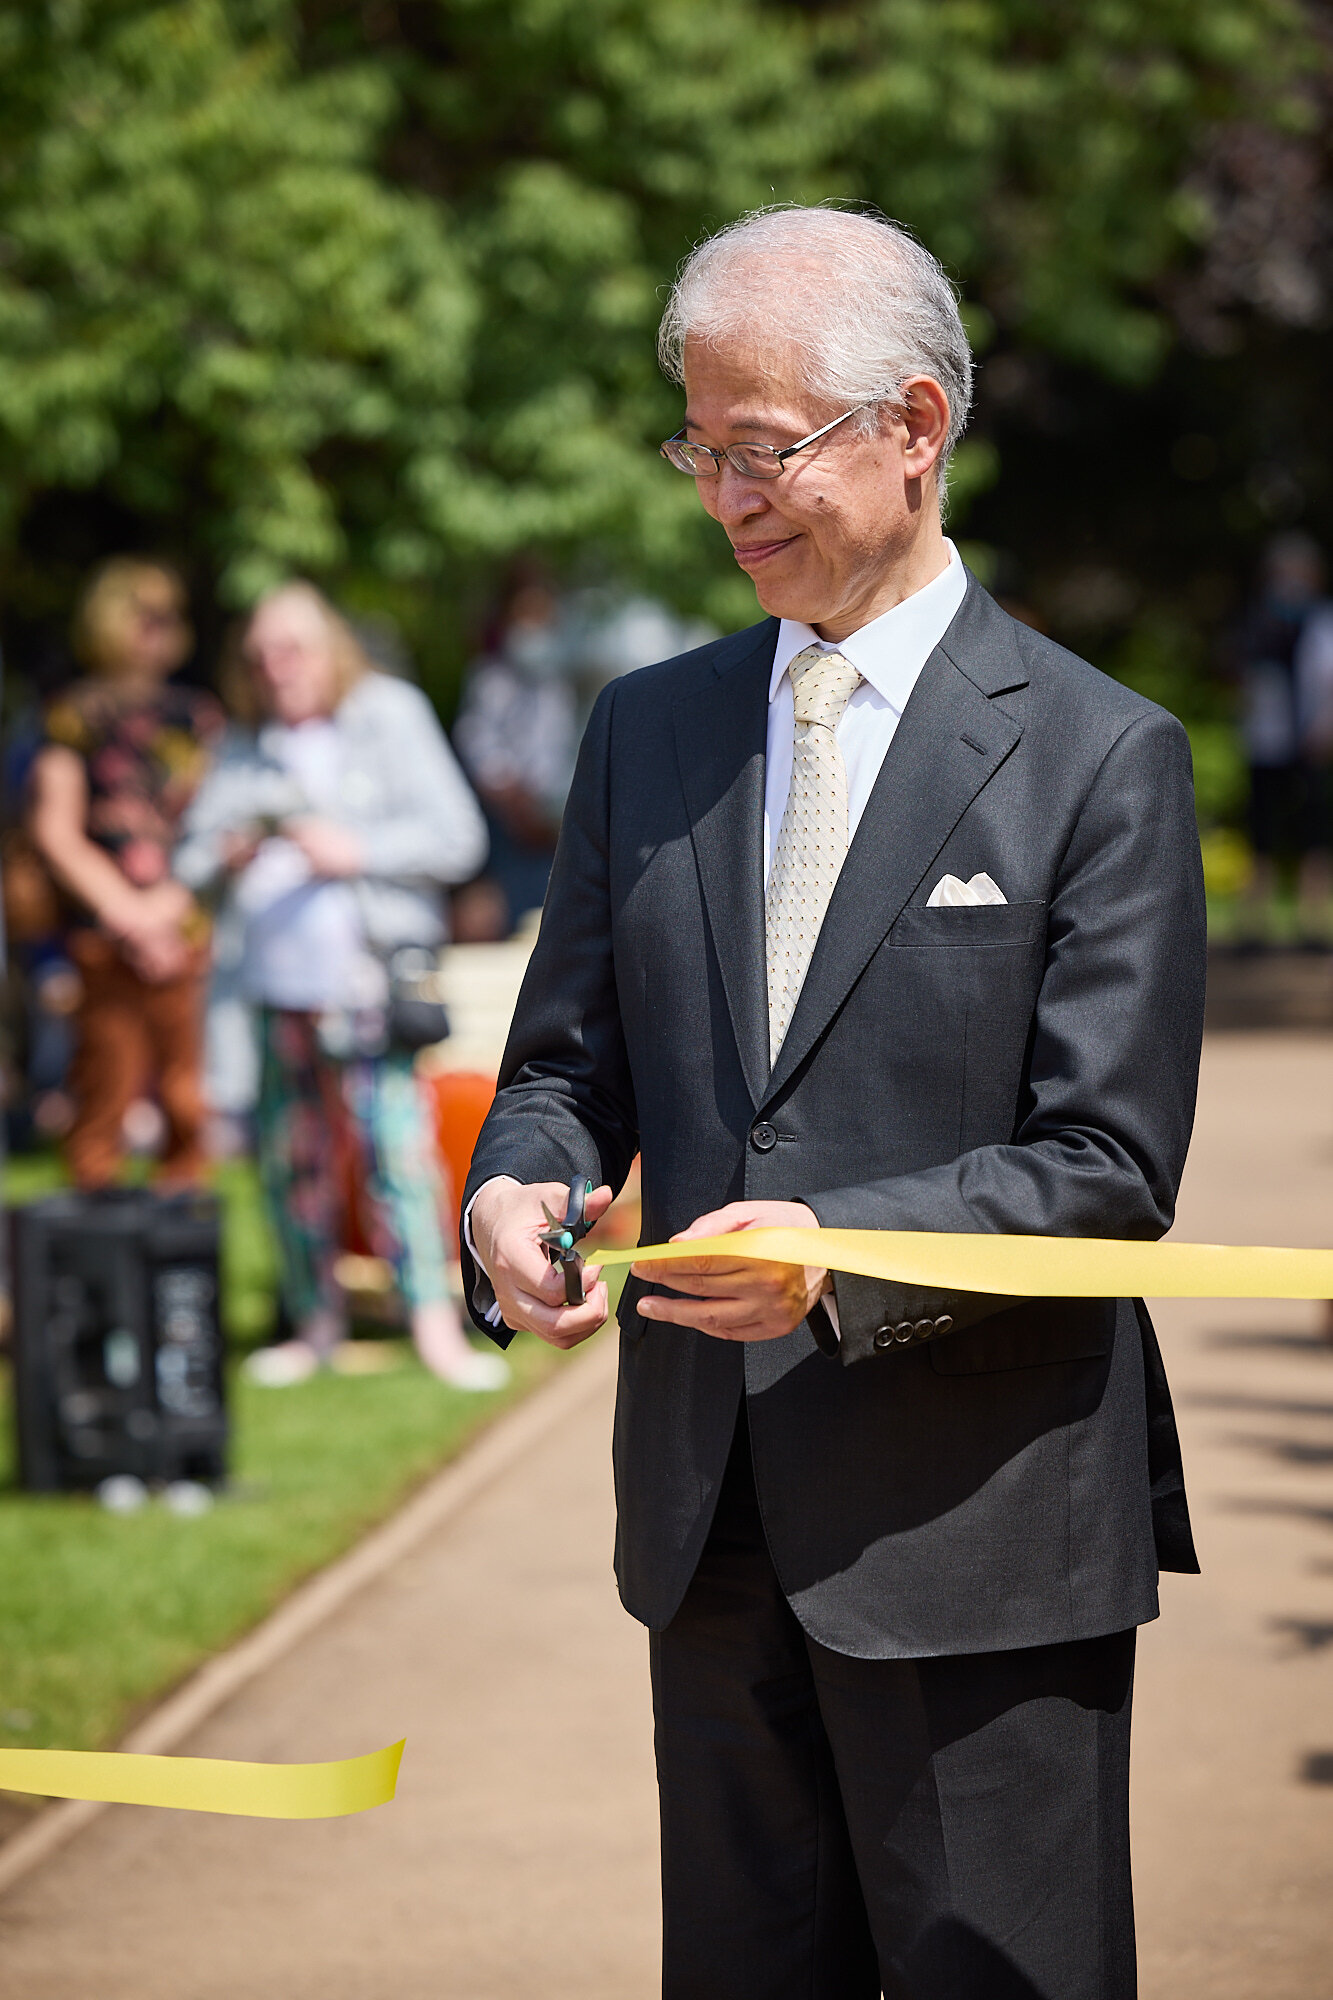 Lord Mayor of Coventry and His Excellency Ambassador Hayashi cut the tape!